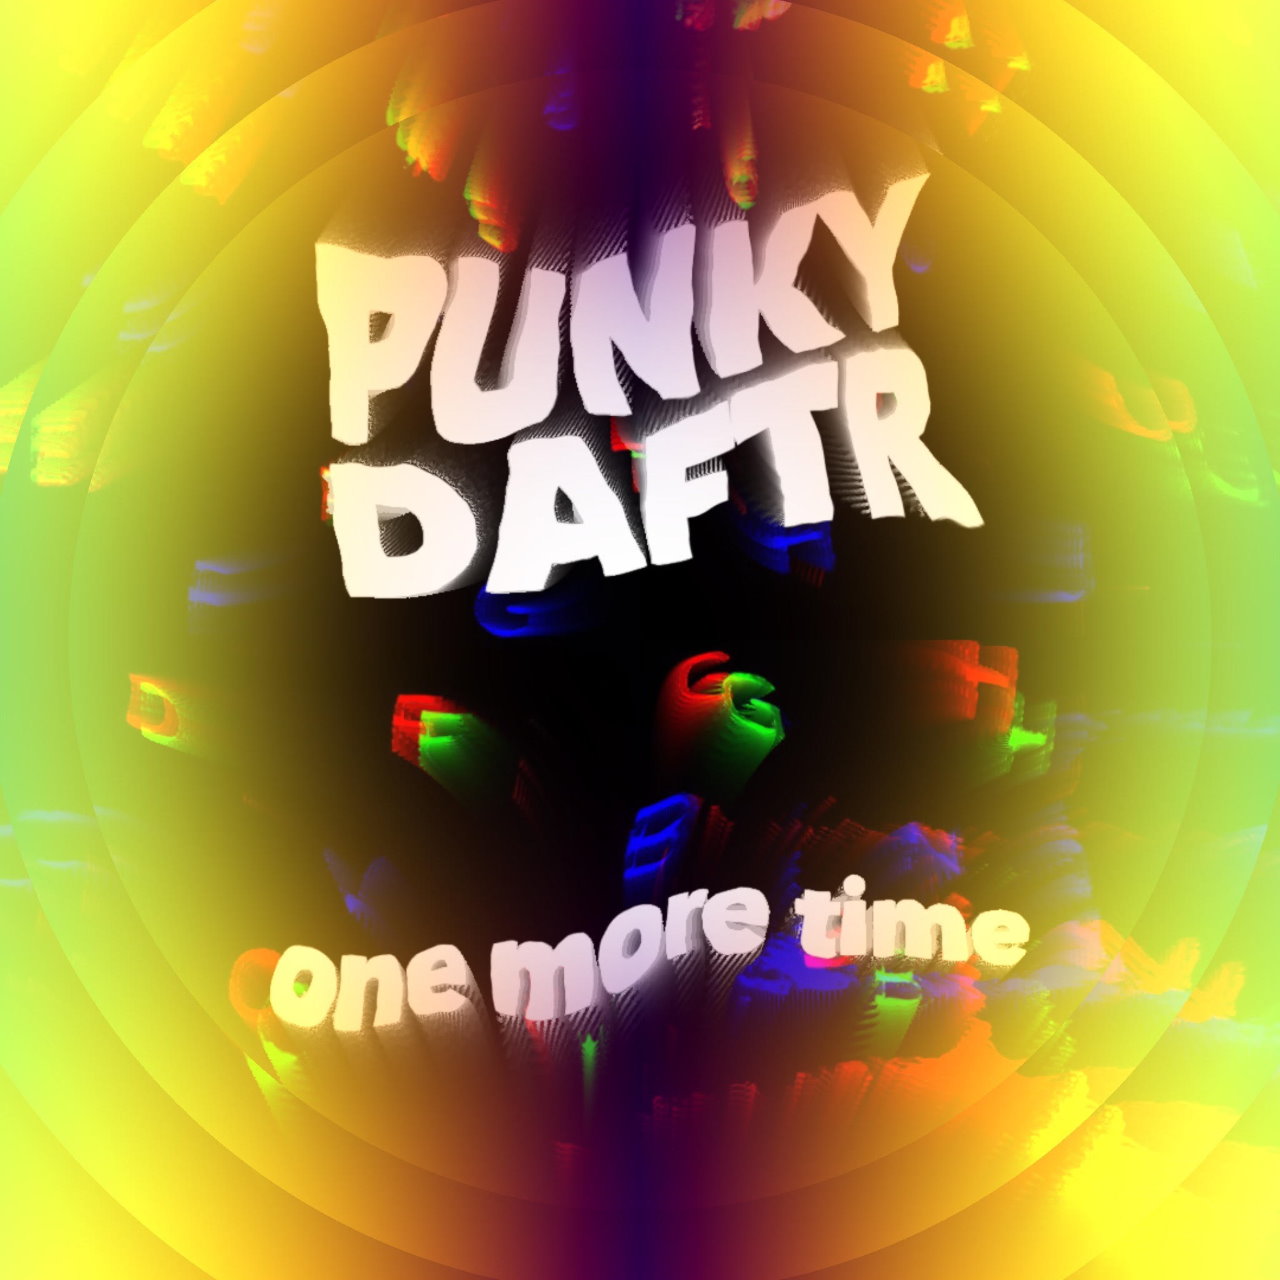 One More Time by Punky Daftr